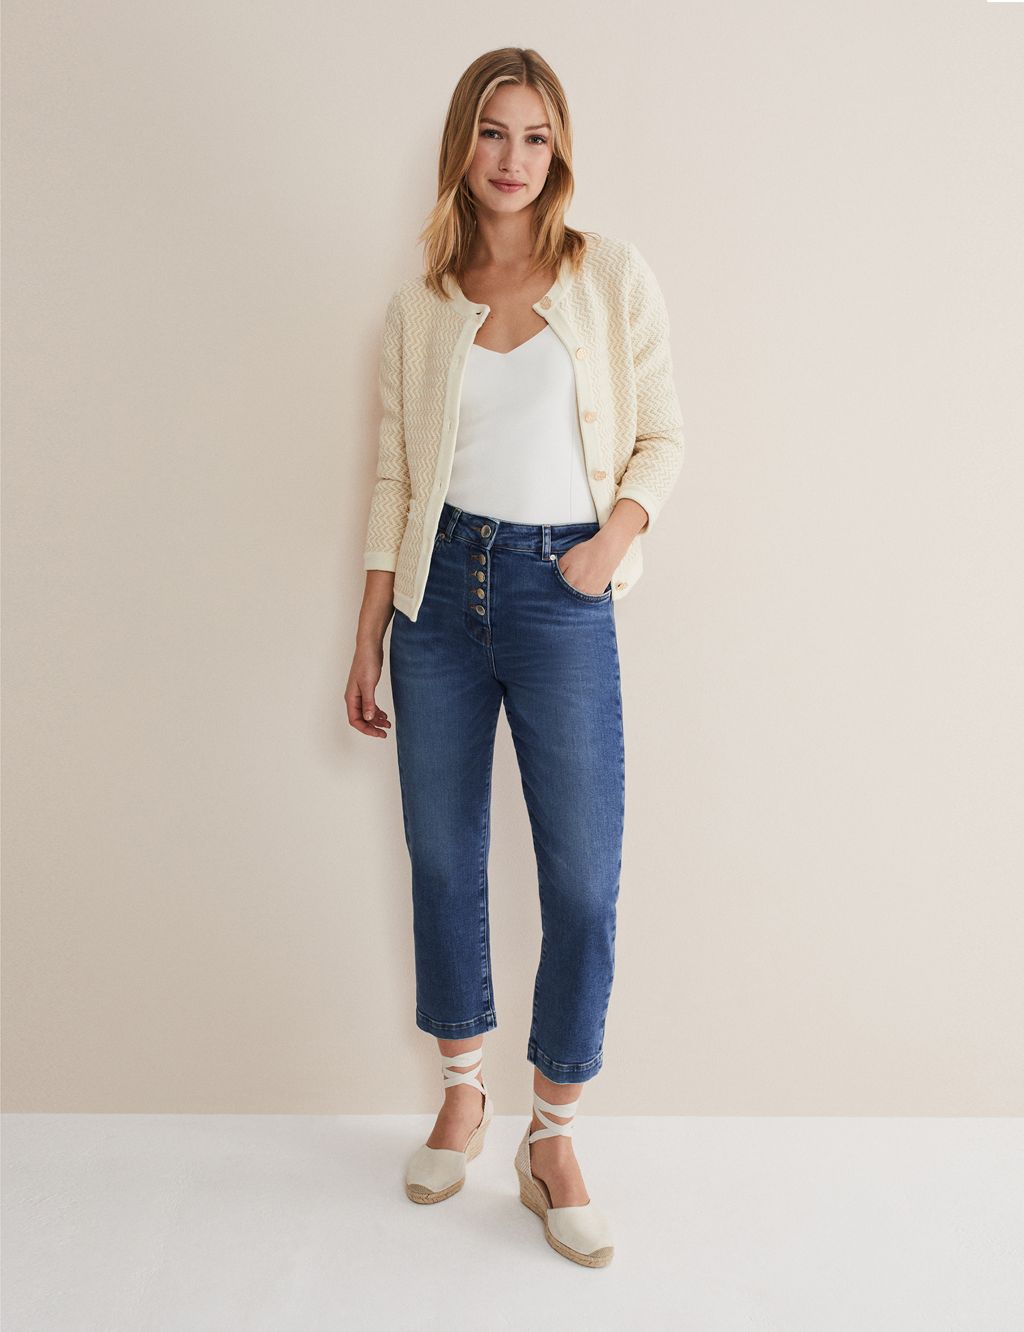 Pure Cotton Textured Cropped Jacket image 4